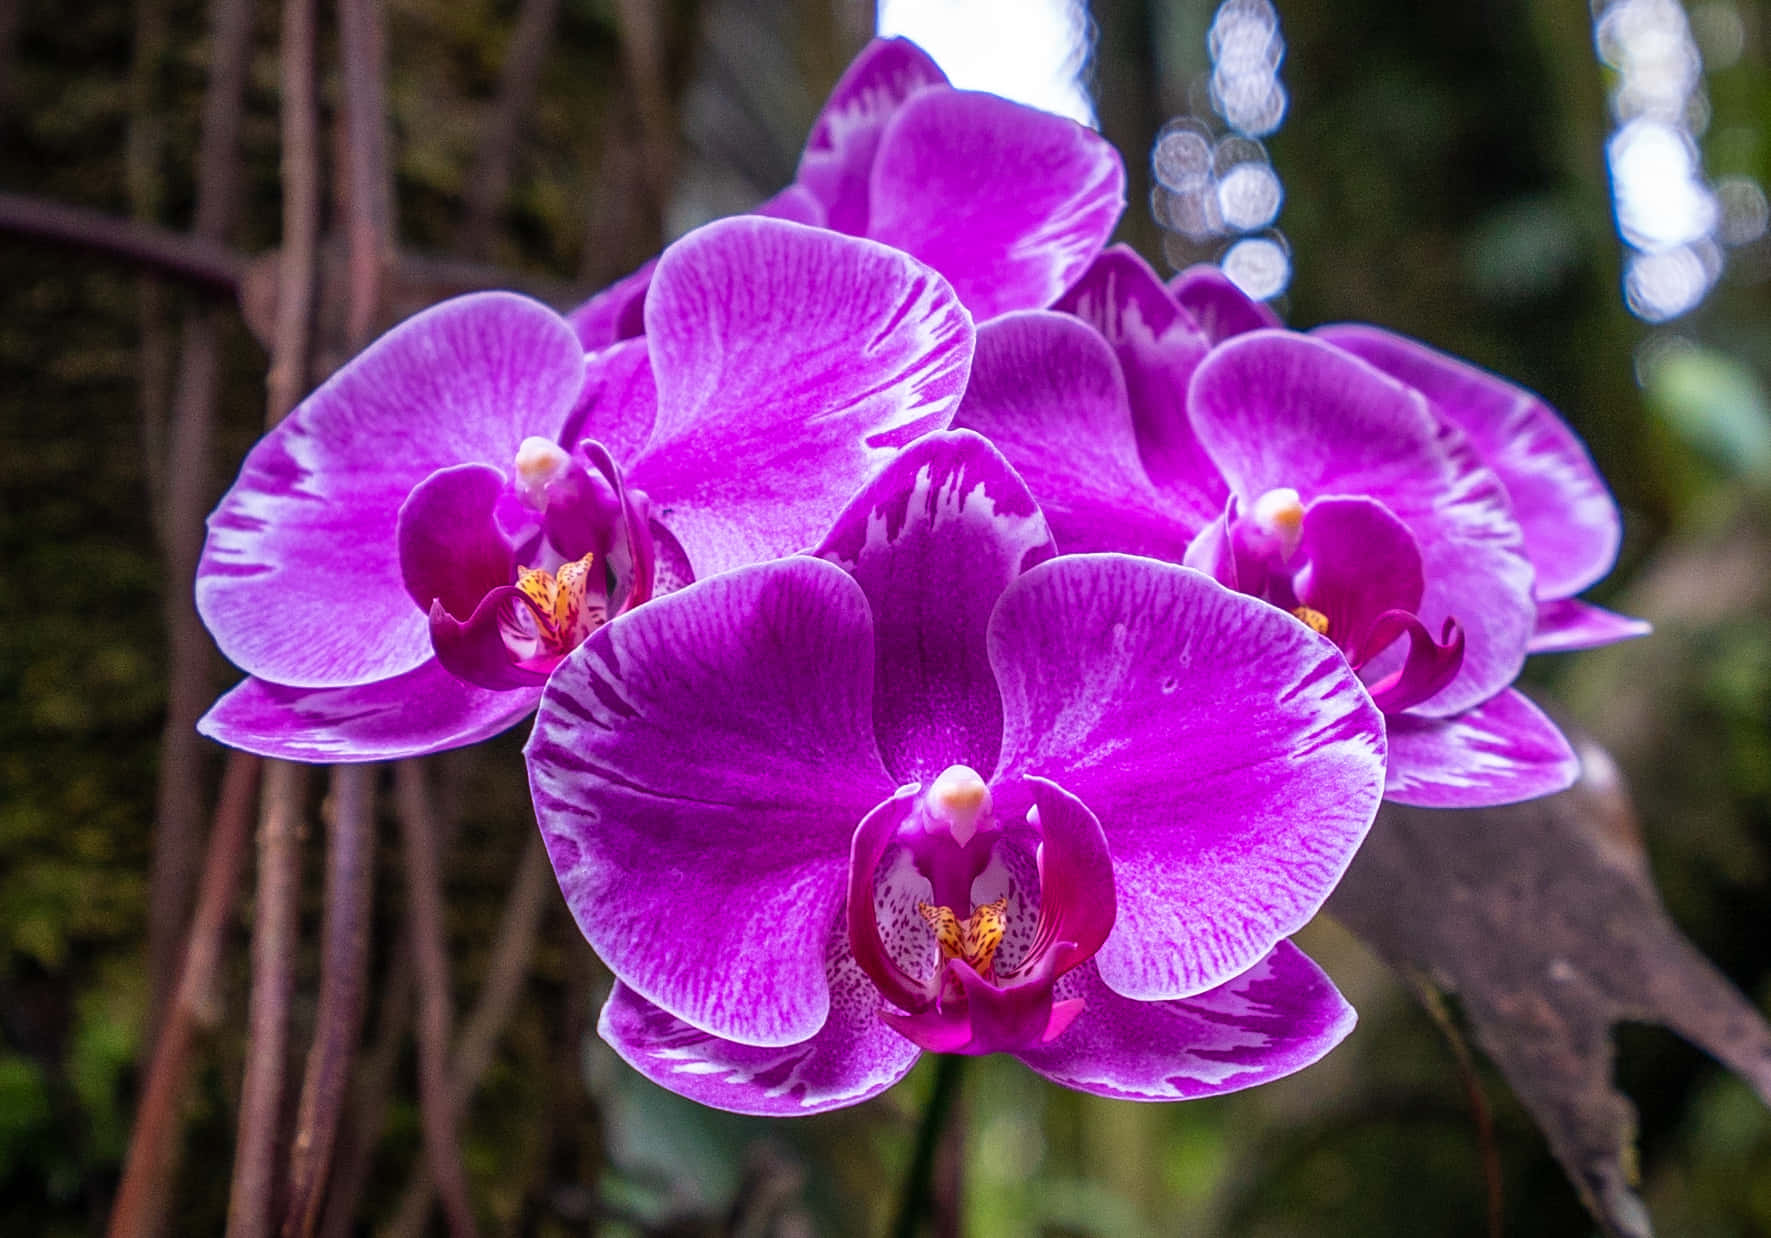 A beautiful orchid flower blooming in the middle of a garden